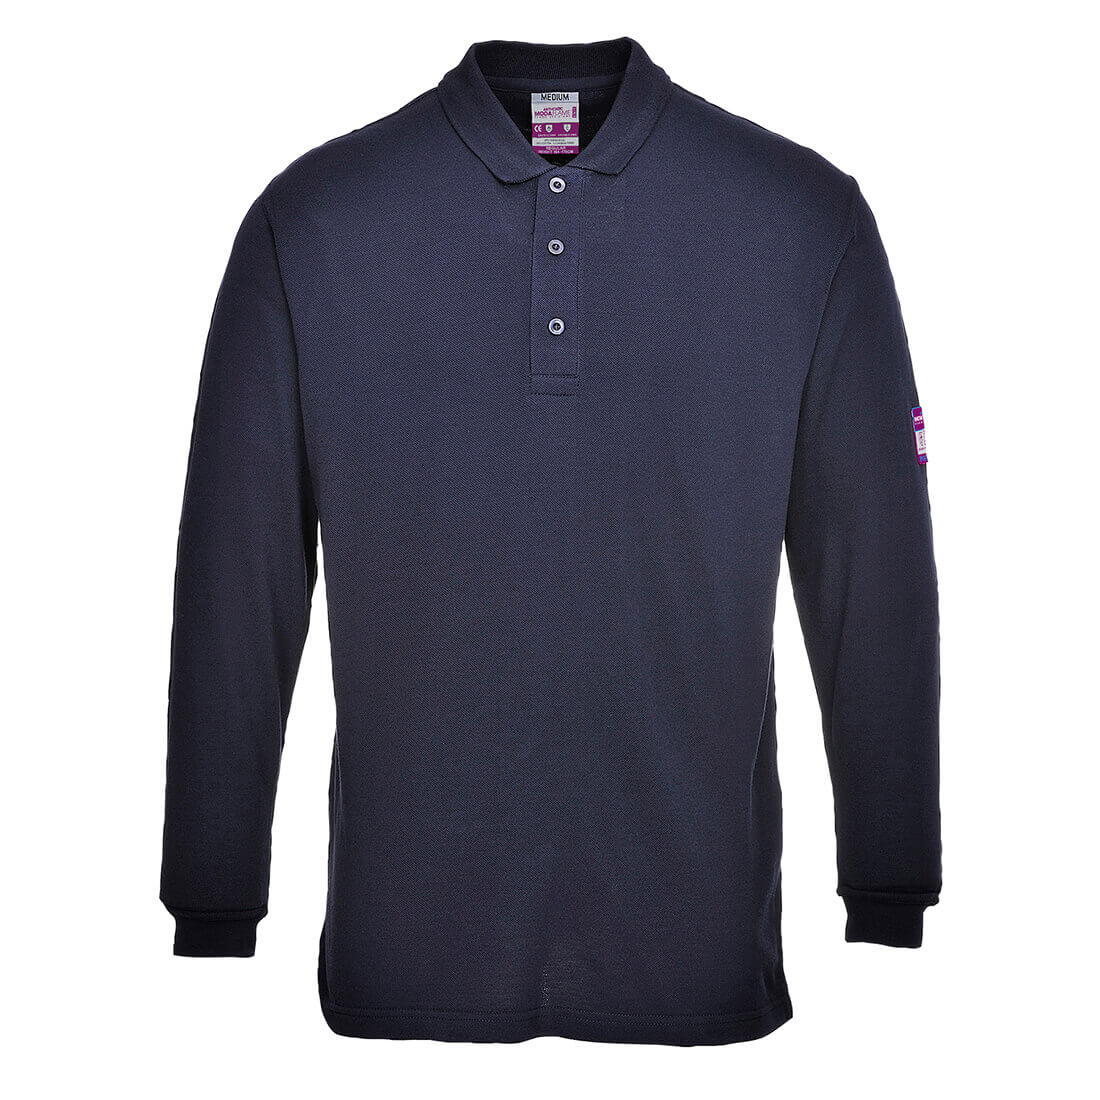 Image of Modaflame Mens Flame Resistant Antistatic Long Sleeve Polo Shirt Navy 3XL